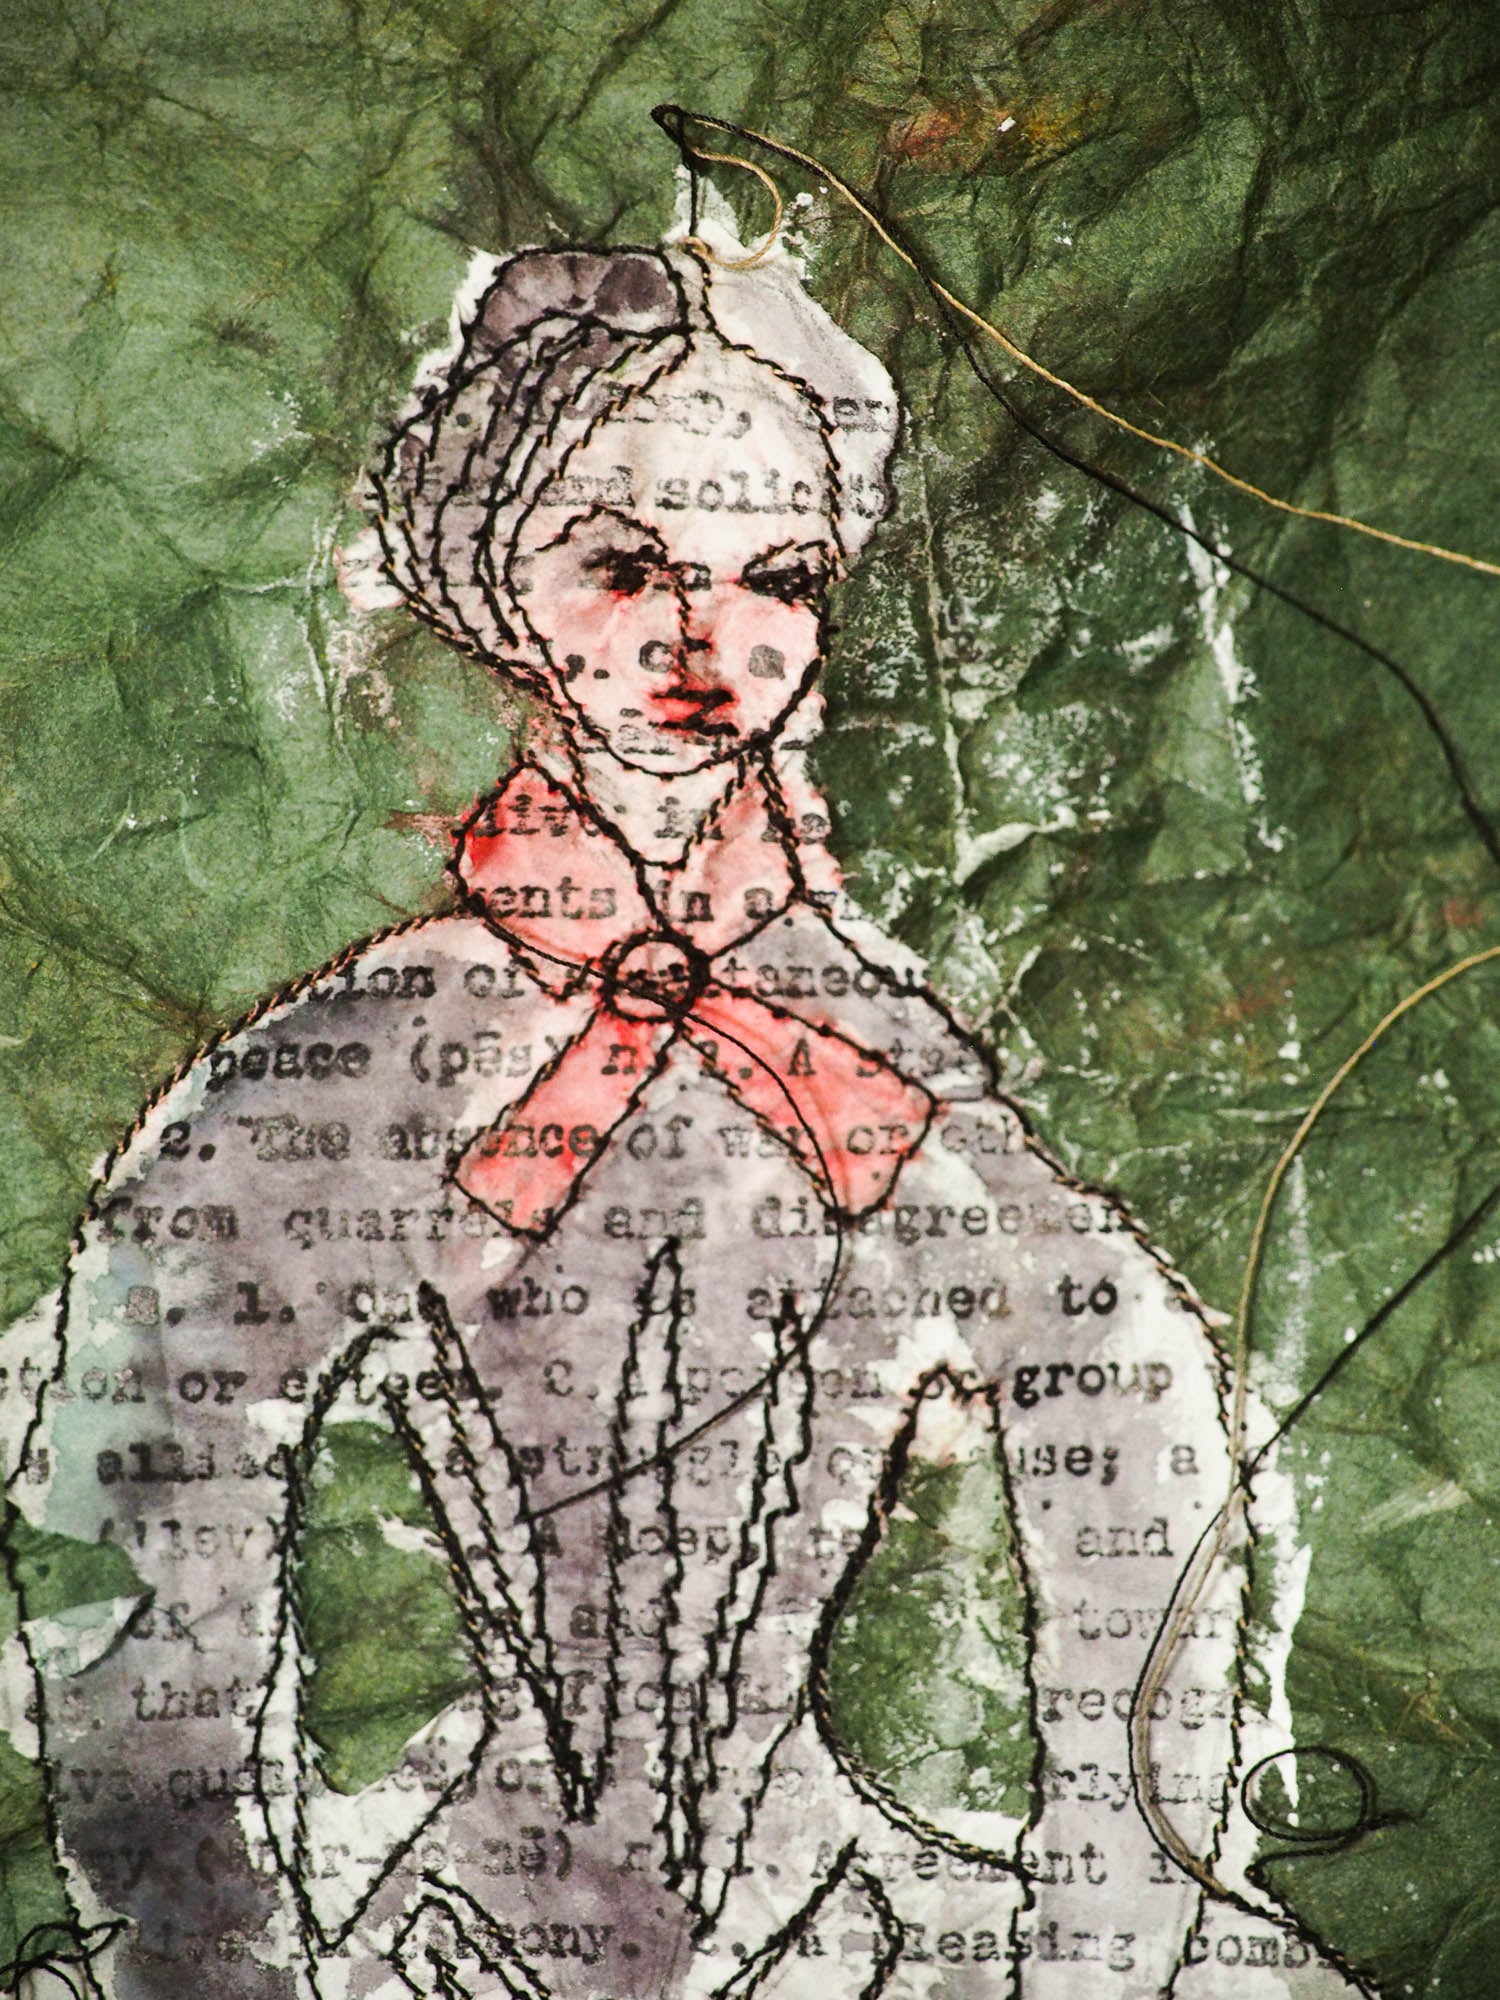 An original mixed media textile art female vintage portrait by Danita Art. Fabric paper, thread, acrylics, watercolor and inks mix to create a beautiful textile mixed media frameable work of art.